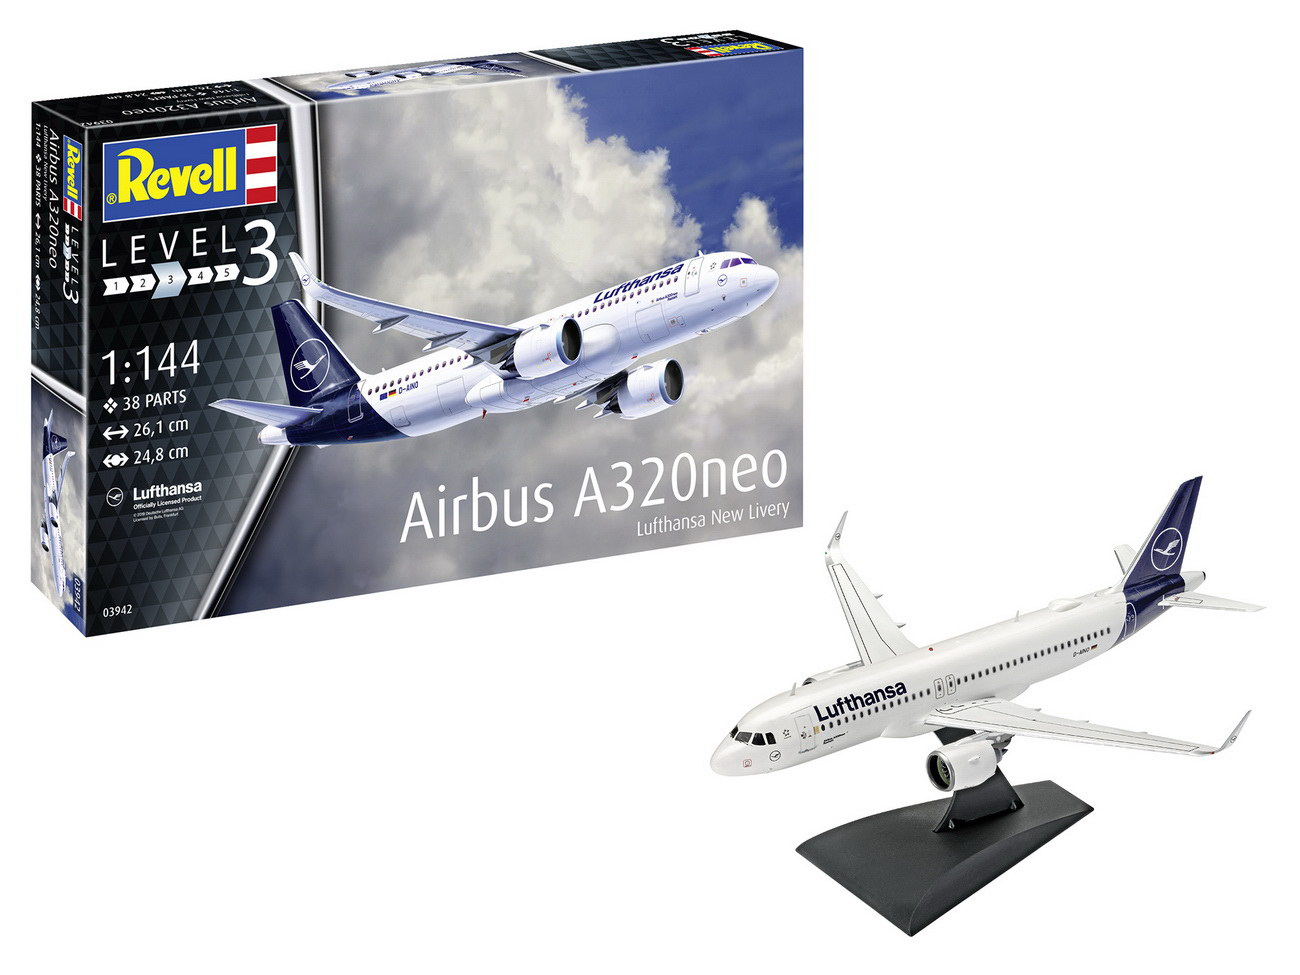 Revell 03942 - Airbus A320 Neo Lufthansa New Livery - Flugzeug Modell